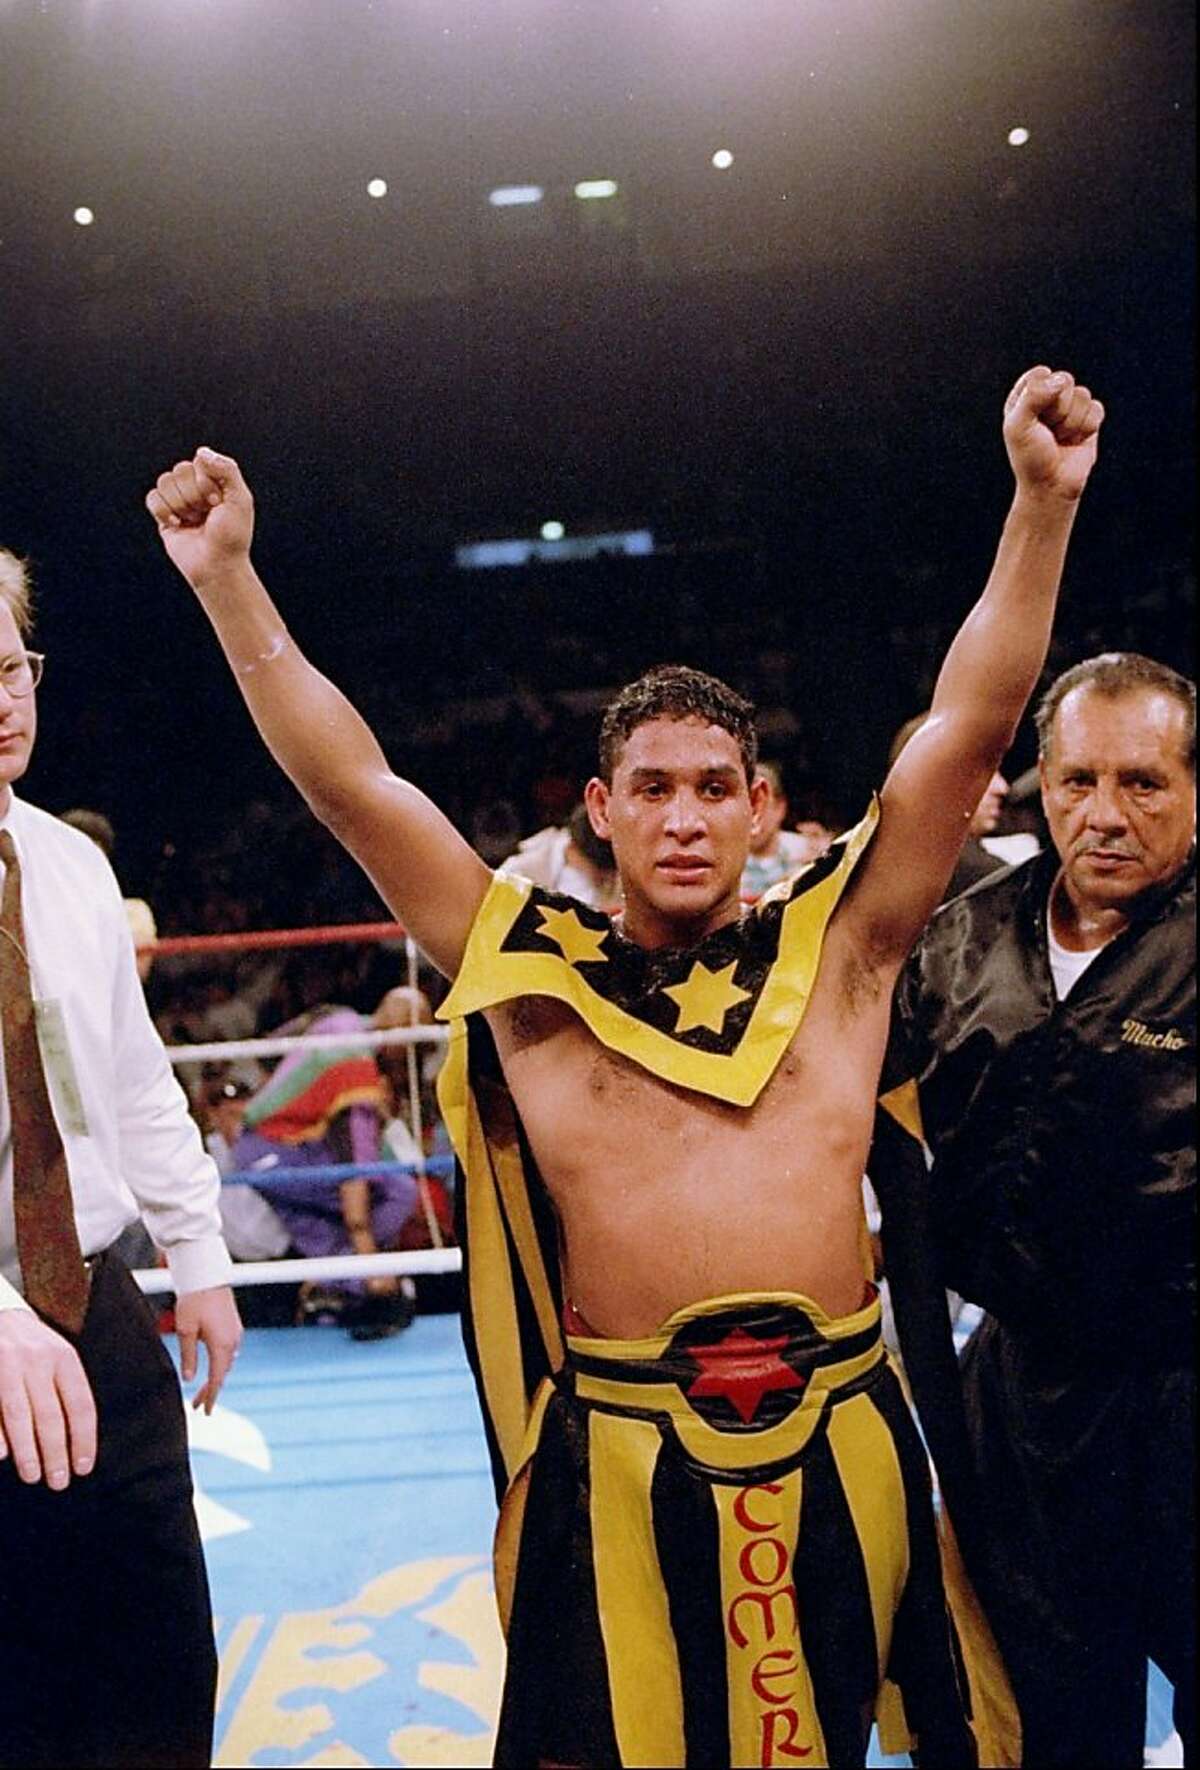 FILE - NOVEMBER 24, 2012: It was reported that ex-boxer Hector "Macho" Camacho died after being taken off life support following a gun shot wound to the face November 24, 2012 in San Juan, Puerto Rico. 19 Jun 1993: Hector Camacho raises his amrs in the air at his fight against Tom Alexander. Mandatory Credit: Holly Stein /Allsport